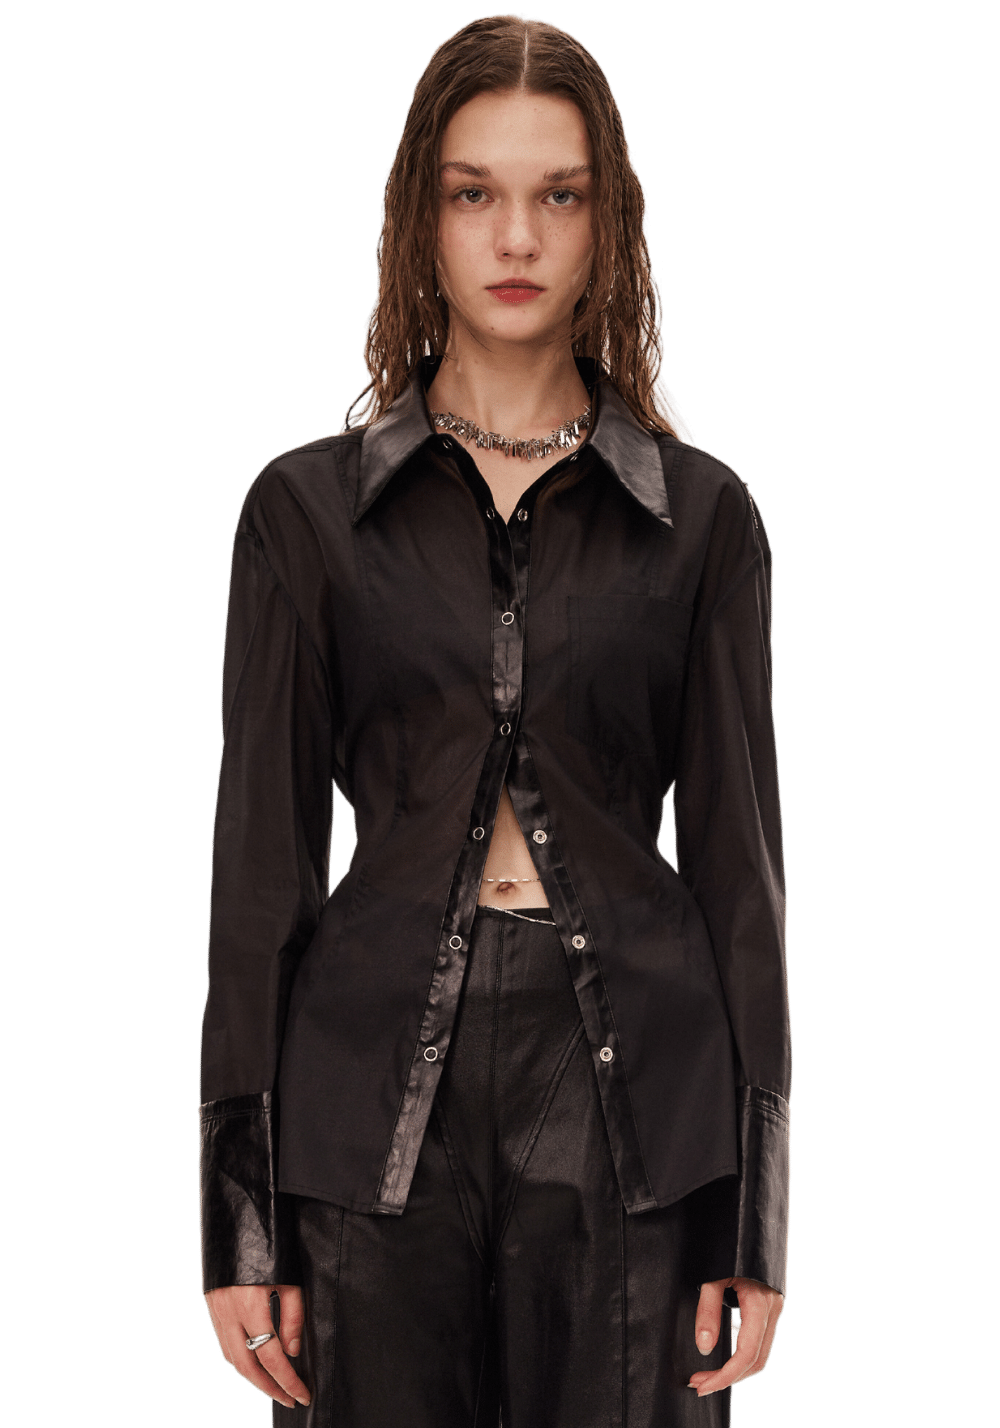 Frosted Silhouette Shirt - PSYLOS 1, Frosted Silhouette Shirt, Shirt, LEEWEI, PSYLOS 1